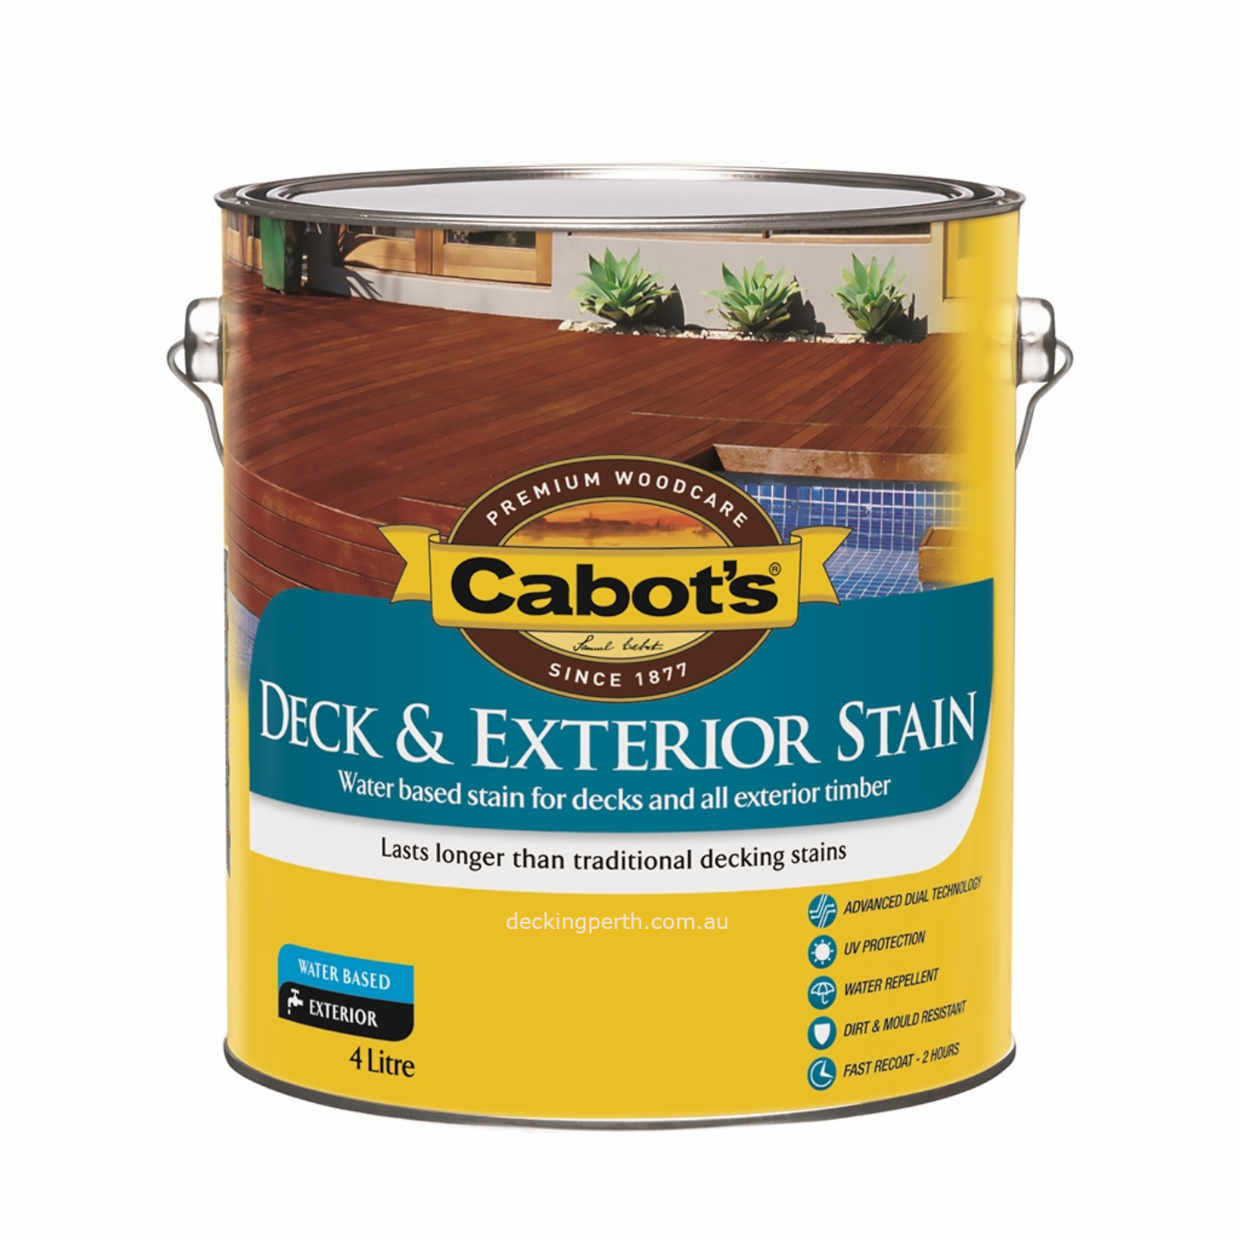 Cabots_Deck___Exterior_Stain_Water_Based_4_litre_Decking_Perth